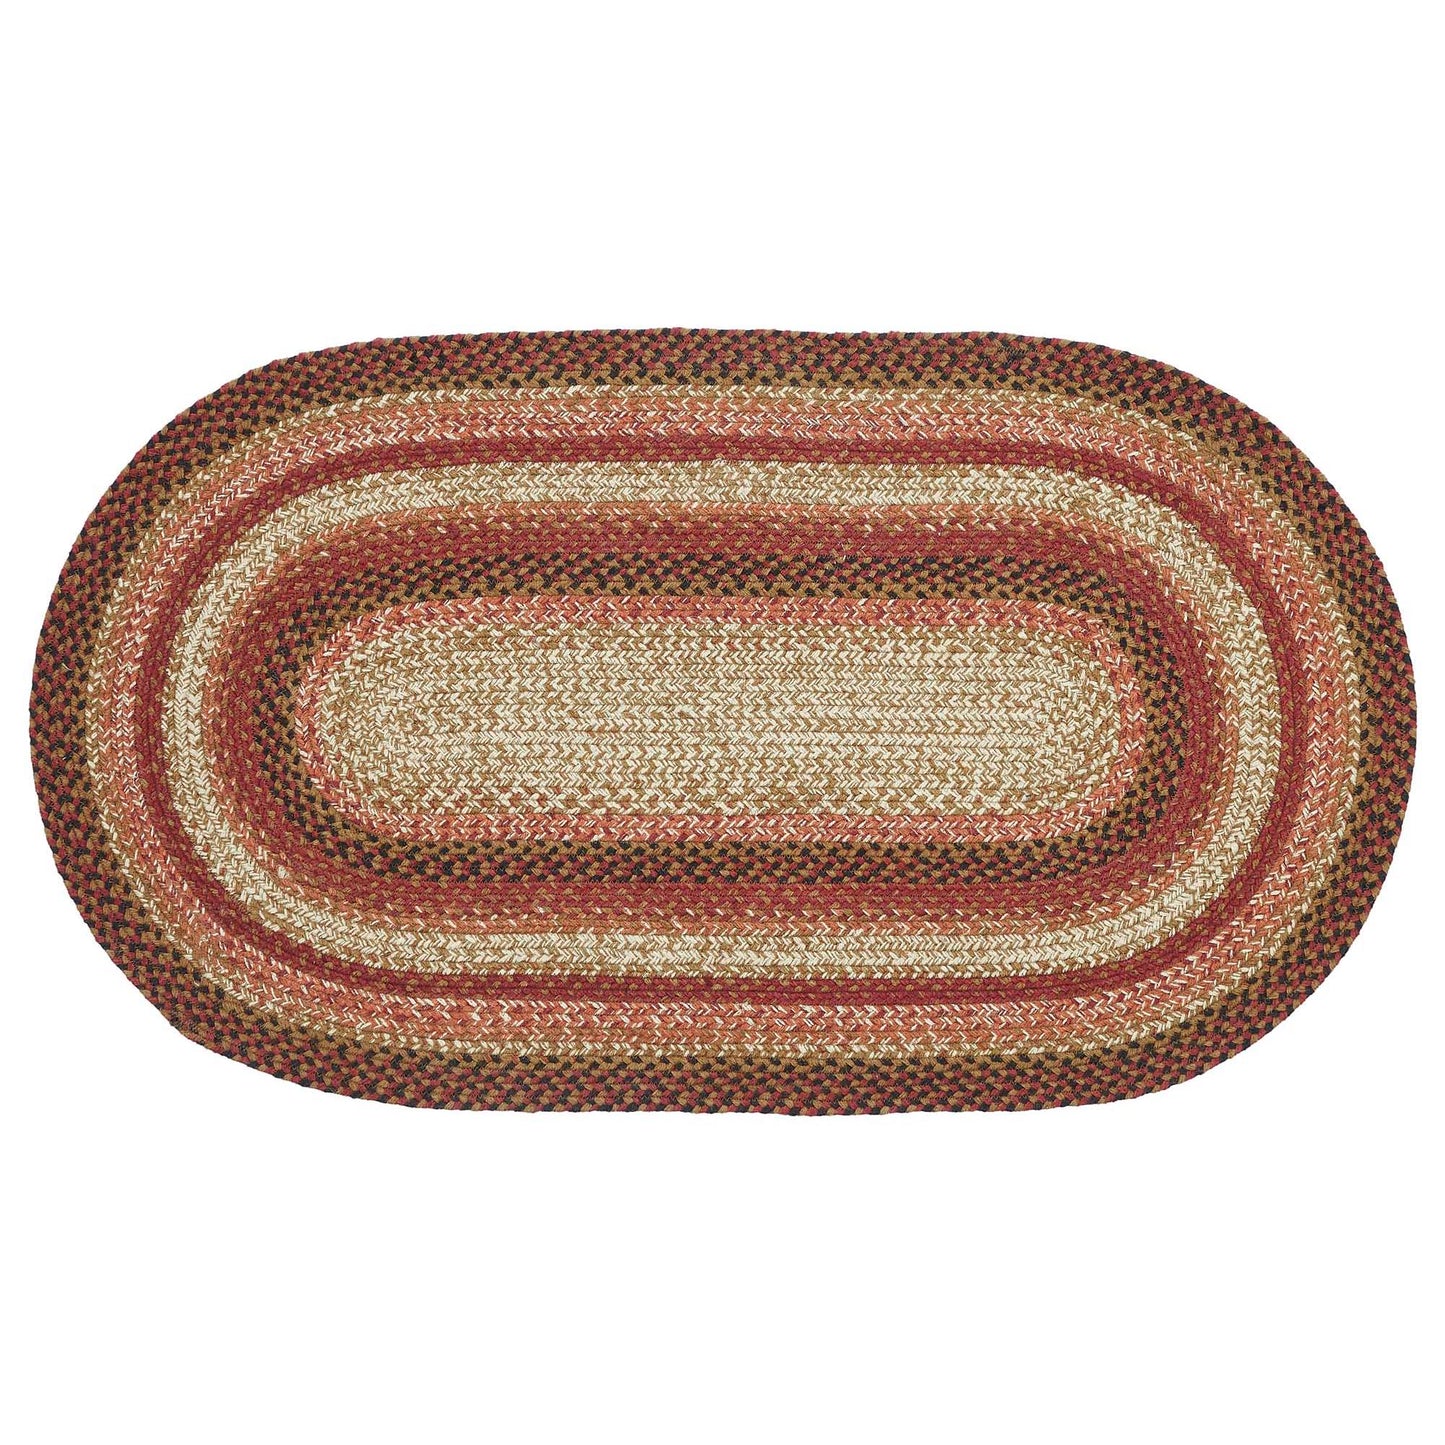 67111-Ginger-Spice-Jute-Rug-Oval-w-Pad-27x48-image-5